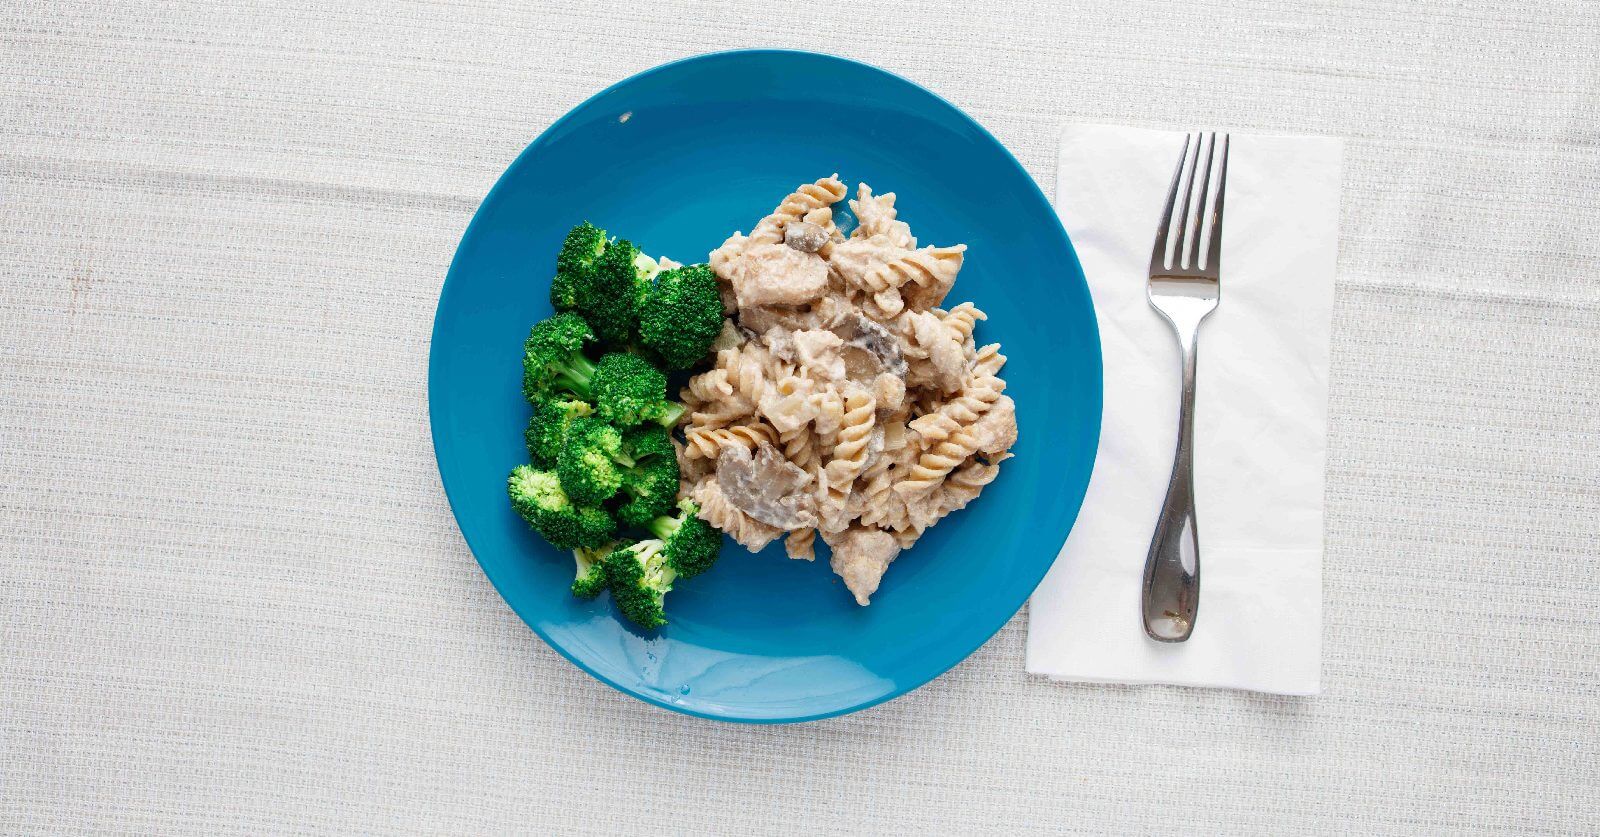 For a filling pasta meal, try this three-step stroganoff!